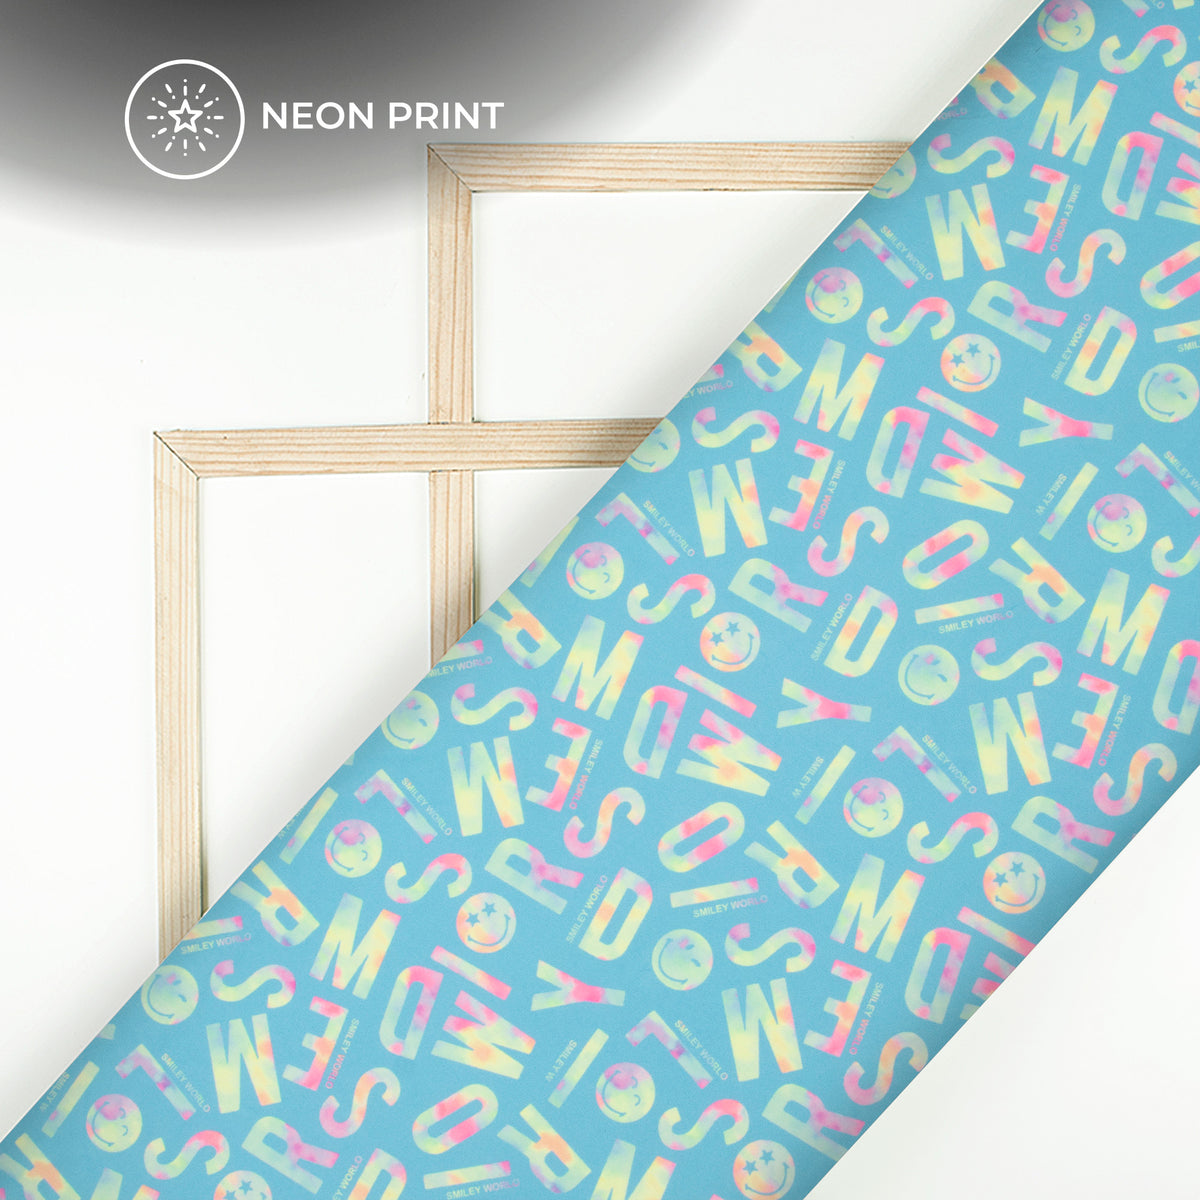 Neon Sky Blue Quirky Digital Print Lycra Fabric (Width 58 Inches)